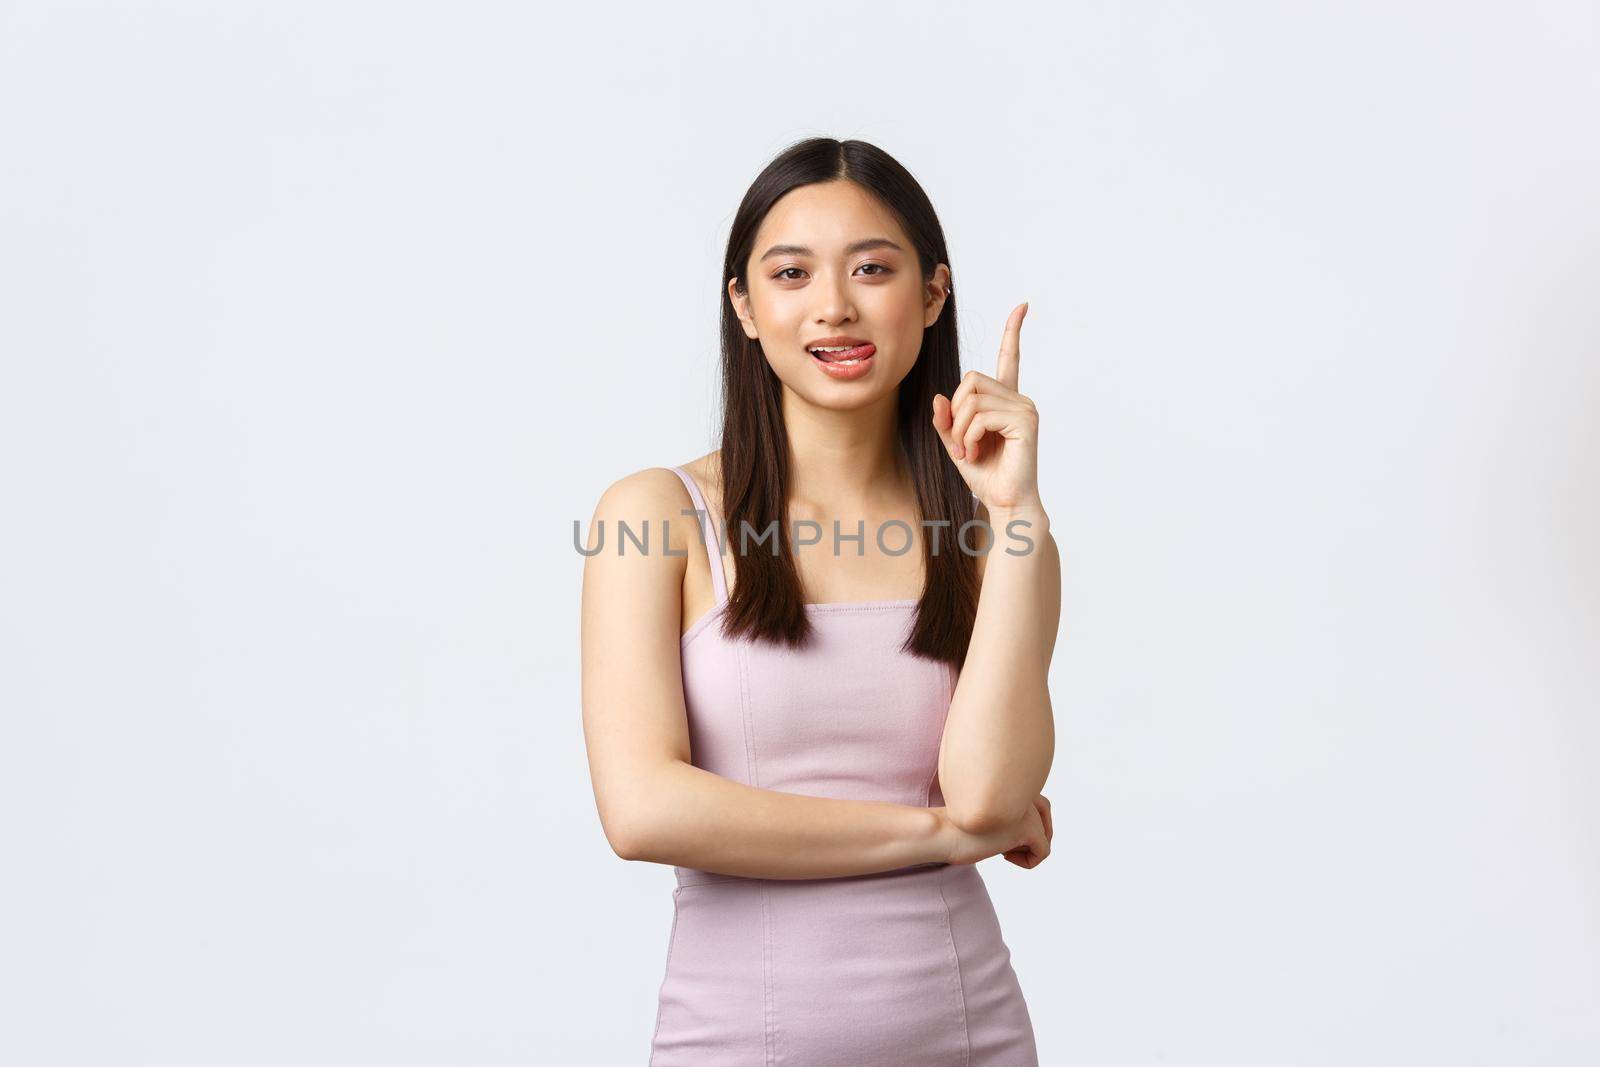 Luxury women, party and holidays concept. Creative attractive asian woman in evening dress have suggestion, raise index finger in eureka sign, propose solution or idea, white background.